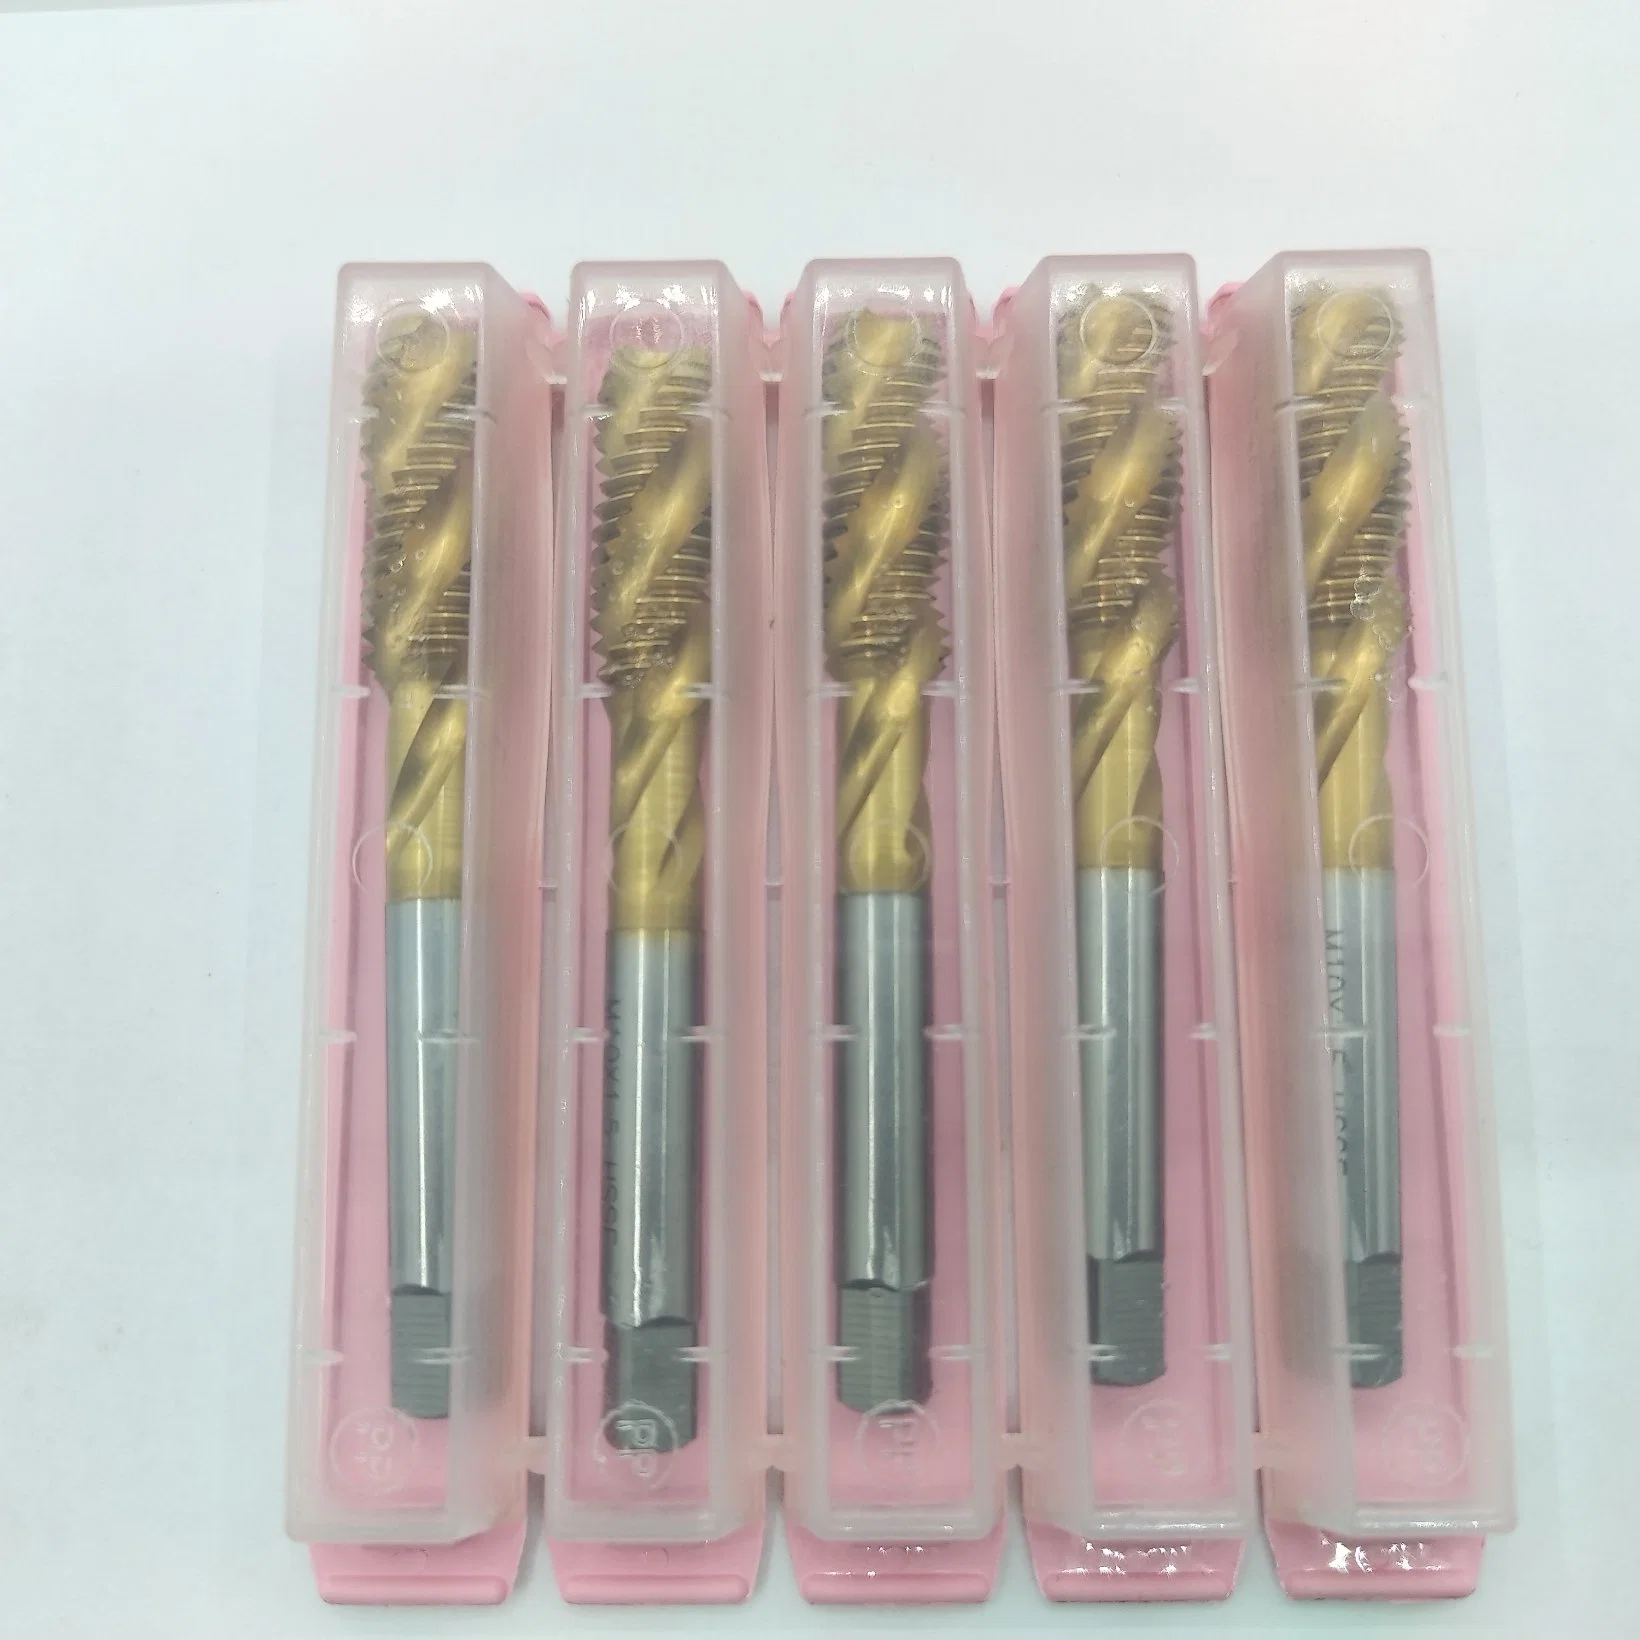 Tosg Brand Tap Hsse_Co Spiral Flute Screw Taps Hand Tools